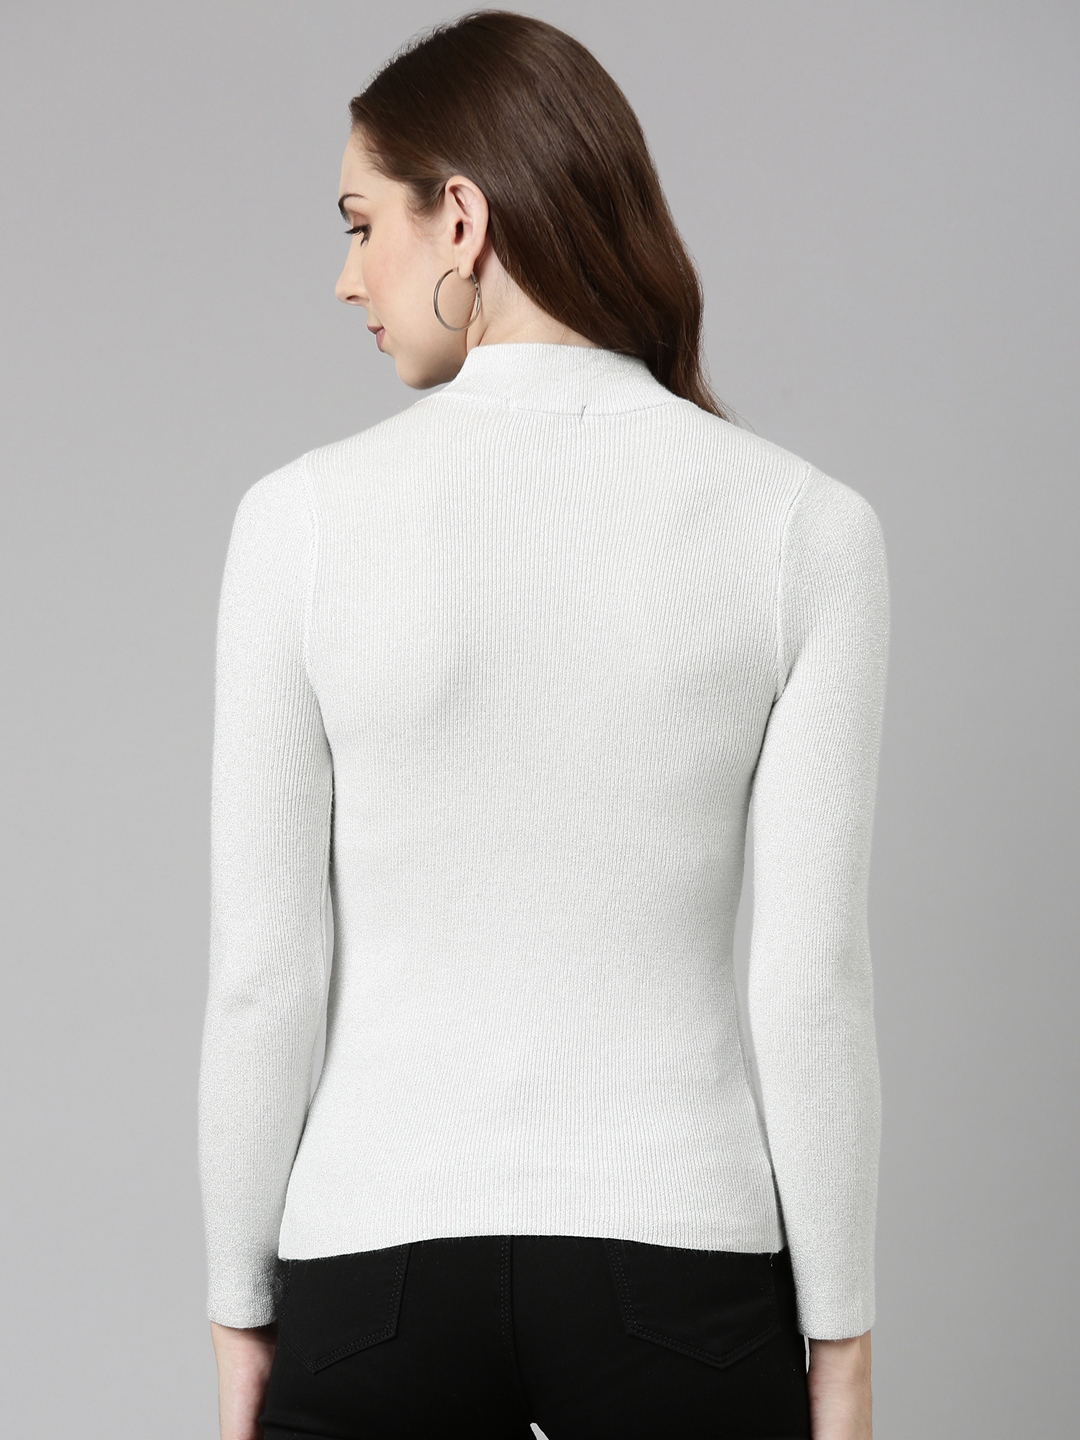 Showoff | SHOWOFF Women's High Neck Embellished Regular Sleeves Fitted White Top 4